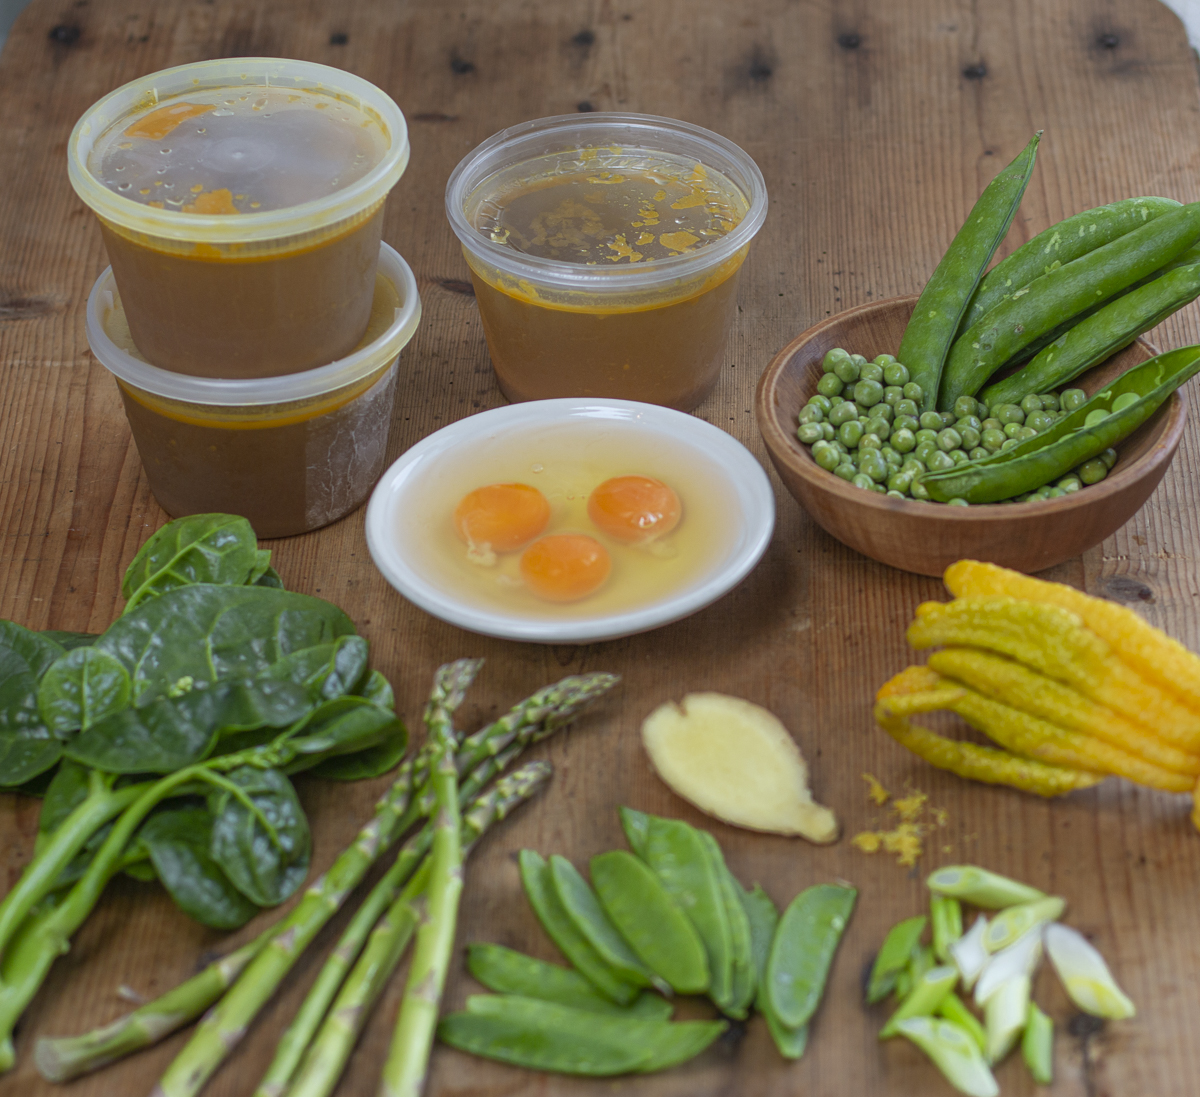 Ingredients for the Spring Egg Drop Soup on a wooden board